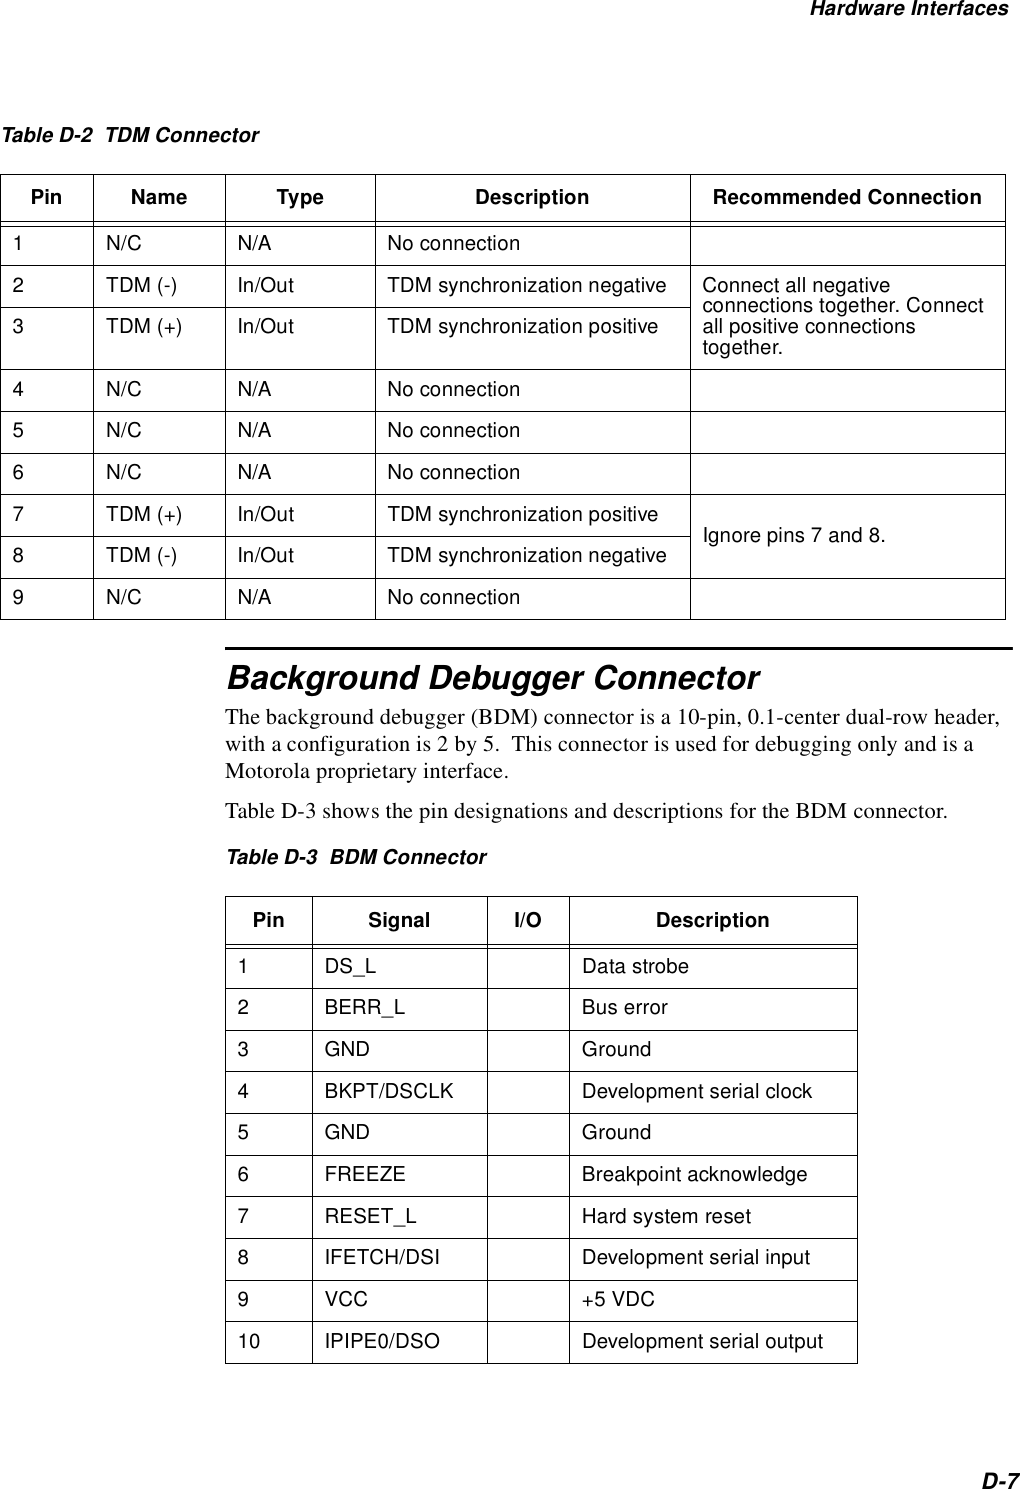 Hardware InterfacesD-7Table D-2  TDM ConnectorBackground Debugger ConnectorThe background debugger (BDM) connector is a 10-pin, 0.1-center dual-row header,  with a configuration is 2 by 5.  This connector is used for debugging only and is a Motorola proprietary interface.Table D-3 shows the pin designations and descriptions for the BDM connector.Table D-3  BDM ConnectorPin Name Type Description Recommended Connection1 N/C N/A  No connection2 TDM (-)  In/Out TDM synchronization negative Connect all negative connections together. Connect all positive connections together.3 TDM (+)  In/Out TDM synchronization positive4 N/C N/A No connection5 N/C N/A No connection6 N/C N/A No connection7 TDM (+) In/Out TDM synchronization positive Ignore pins 7 and 8.8 TDM (-) In/Out TDM synchronization negative9 N/C N/A No connectionPin Signal I/O Description1 DS_L Data strobe2 BERR_L Bus error3 GND Ground4 BKPT/DSCLK Development serial clock5 GND Ground 6 FREEZE Breakpoint acknowledge7 RESET_L Hard system reset8 IFETCH/DSI Development serial input9VCC +5 VDC10 IPIPE0/DSO Development serial output